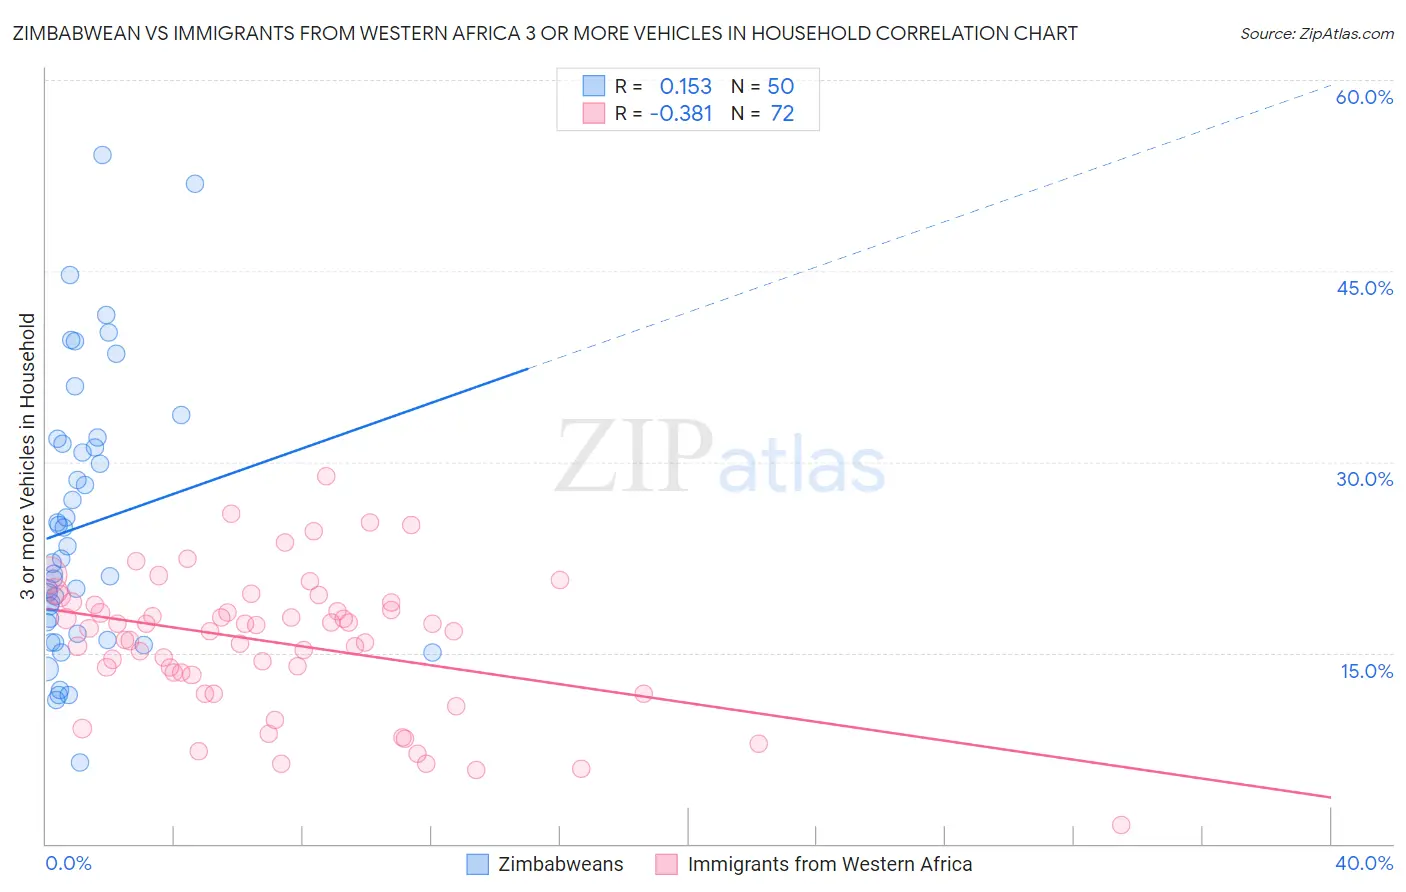 Zimbabwean vs Immigrants from Western Africa 3 or more Vehicles in Household